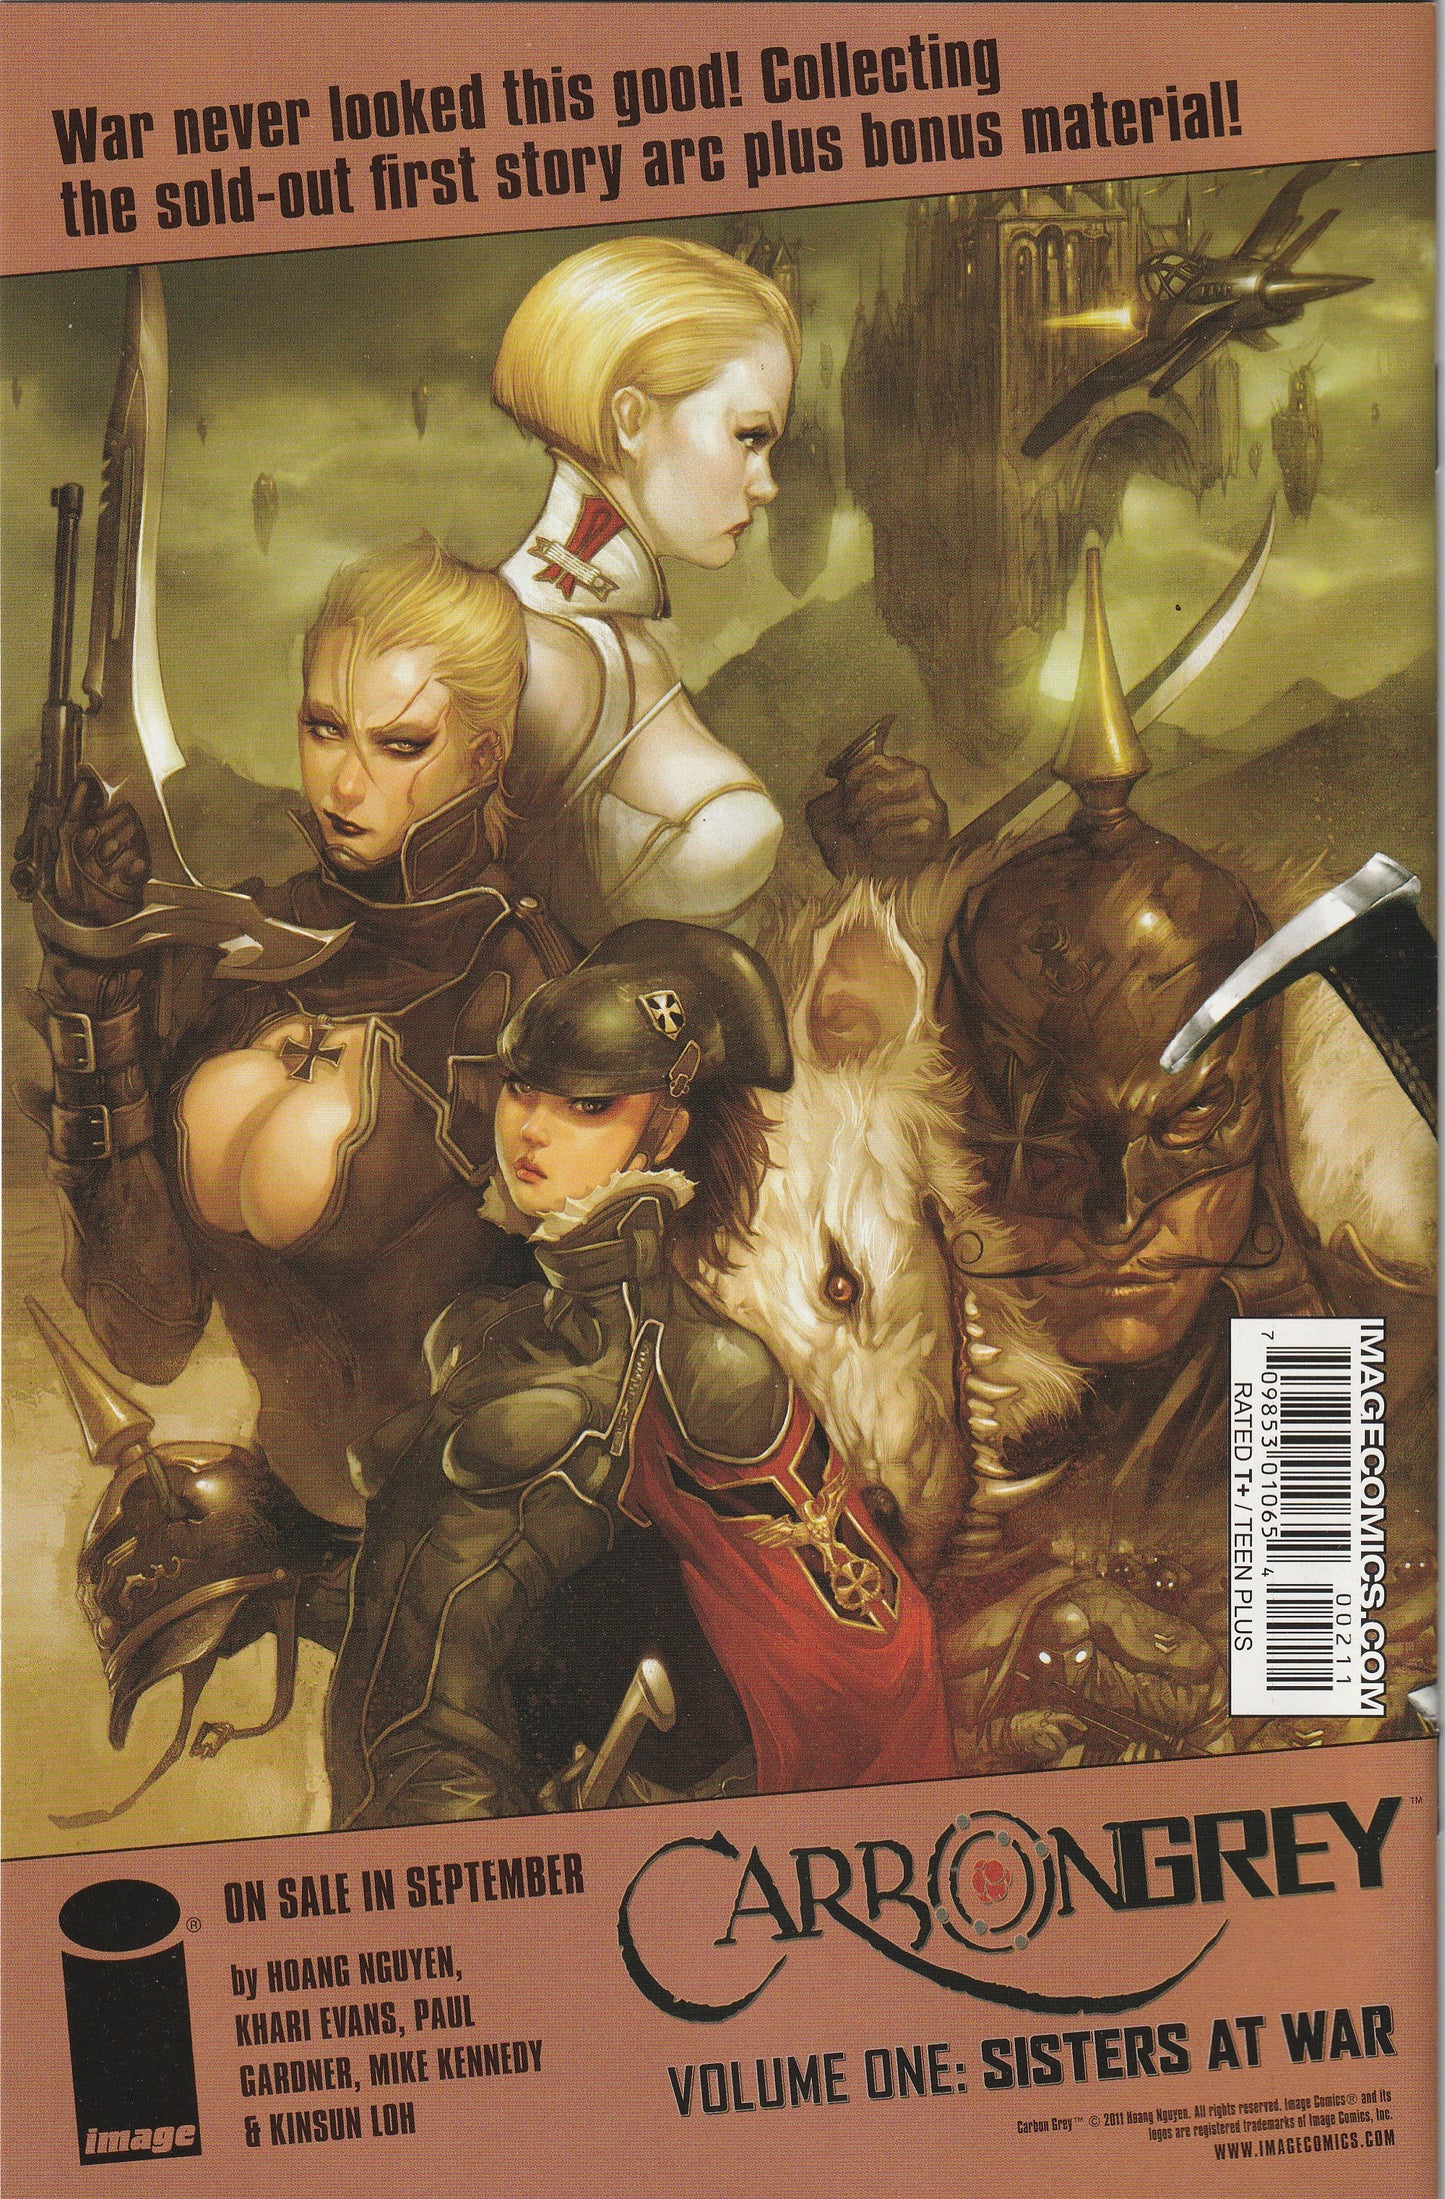 Avengelyne #2 (2011) - Cover A Rob Liefeld